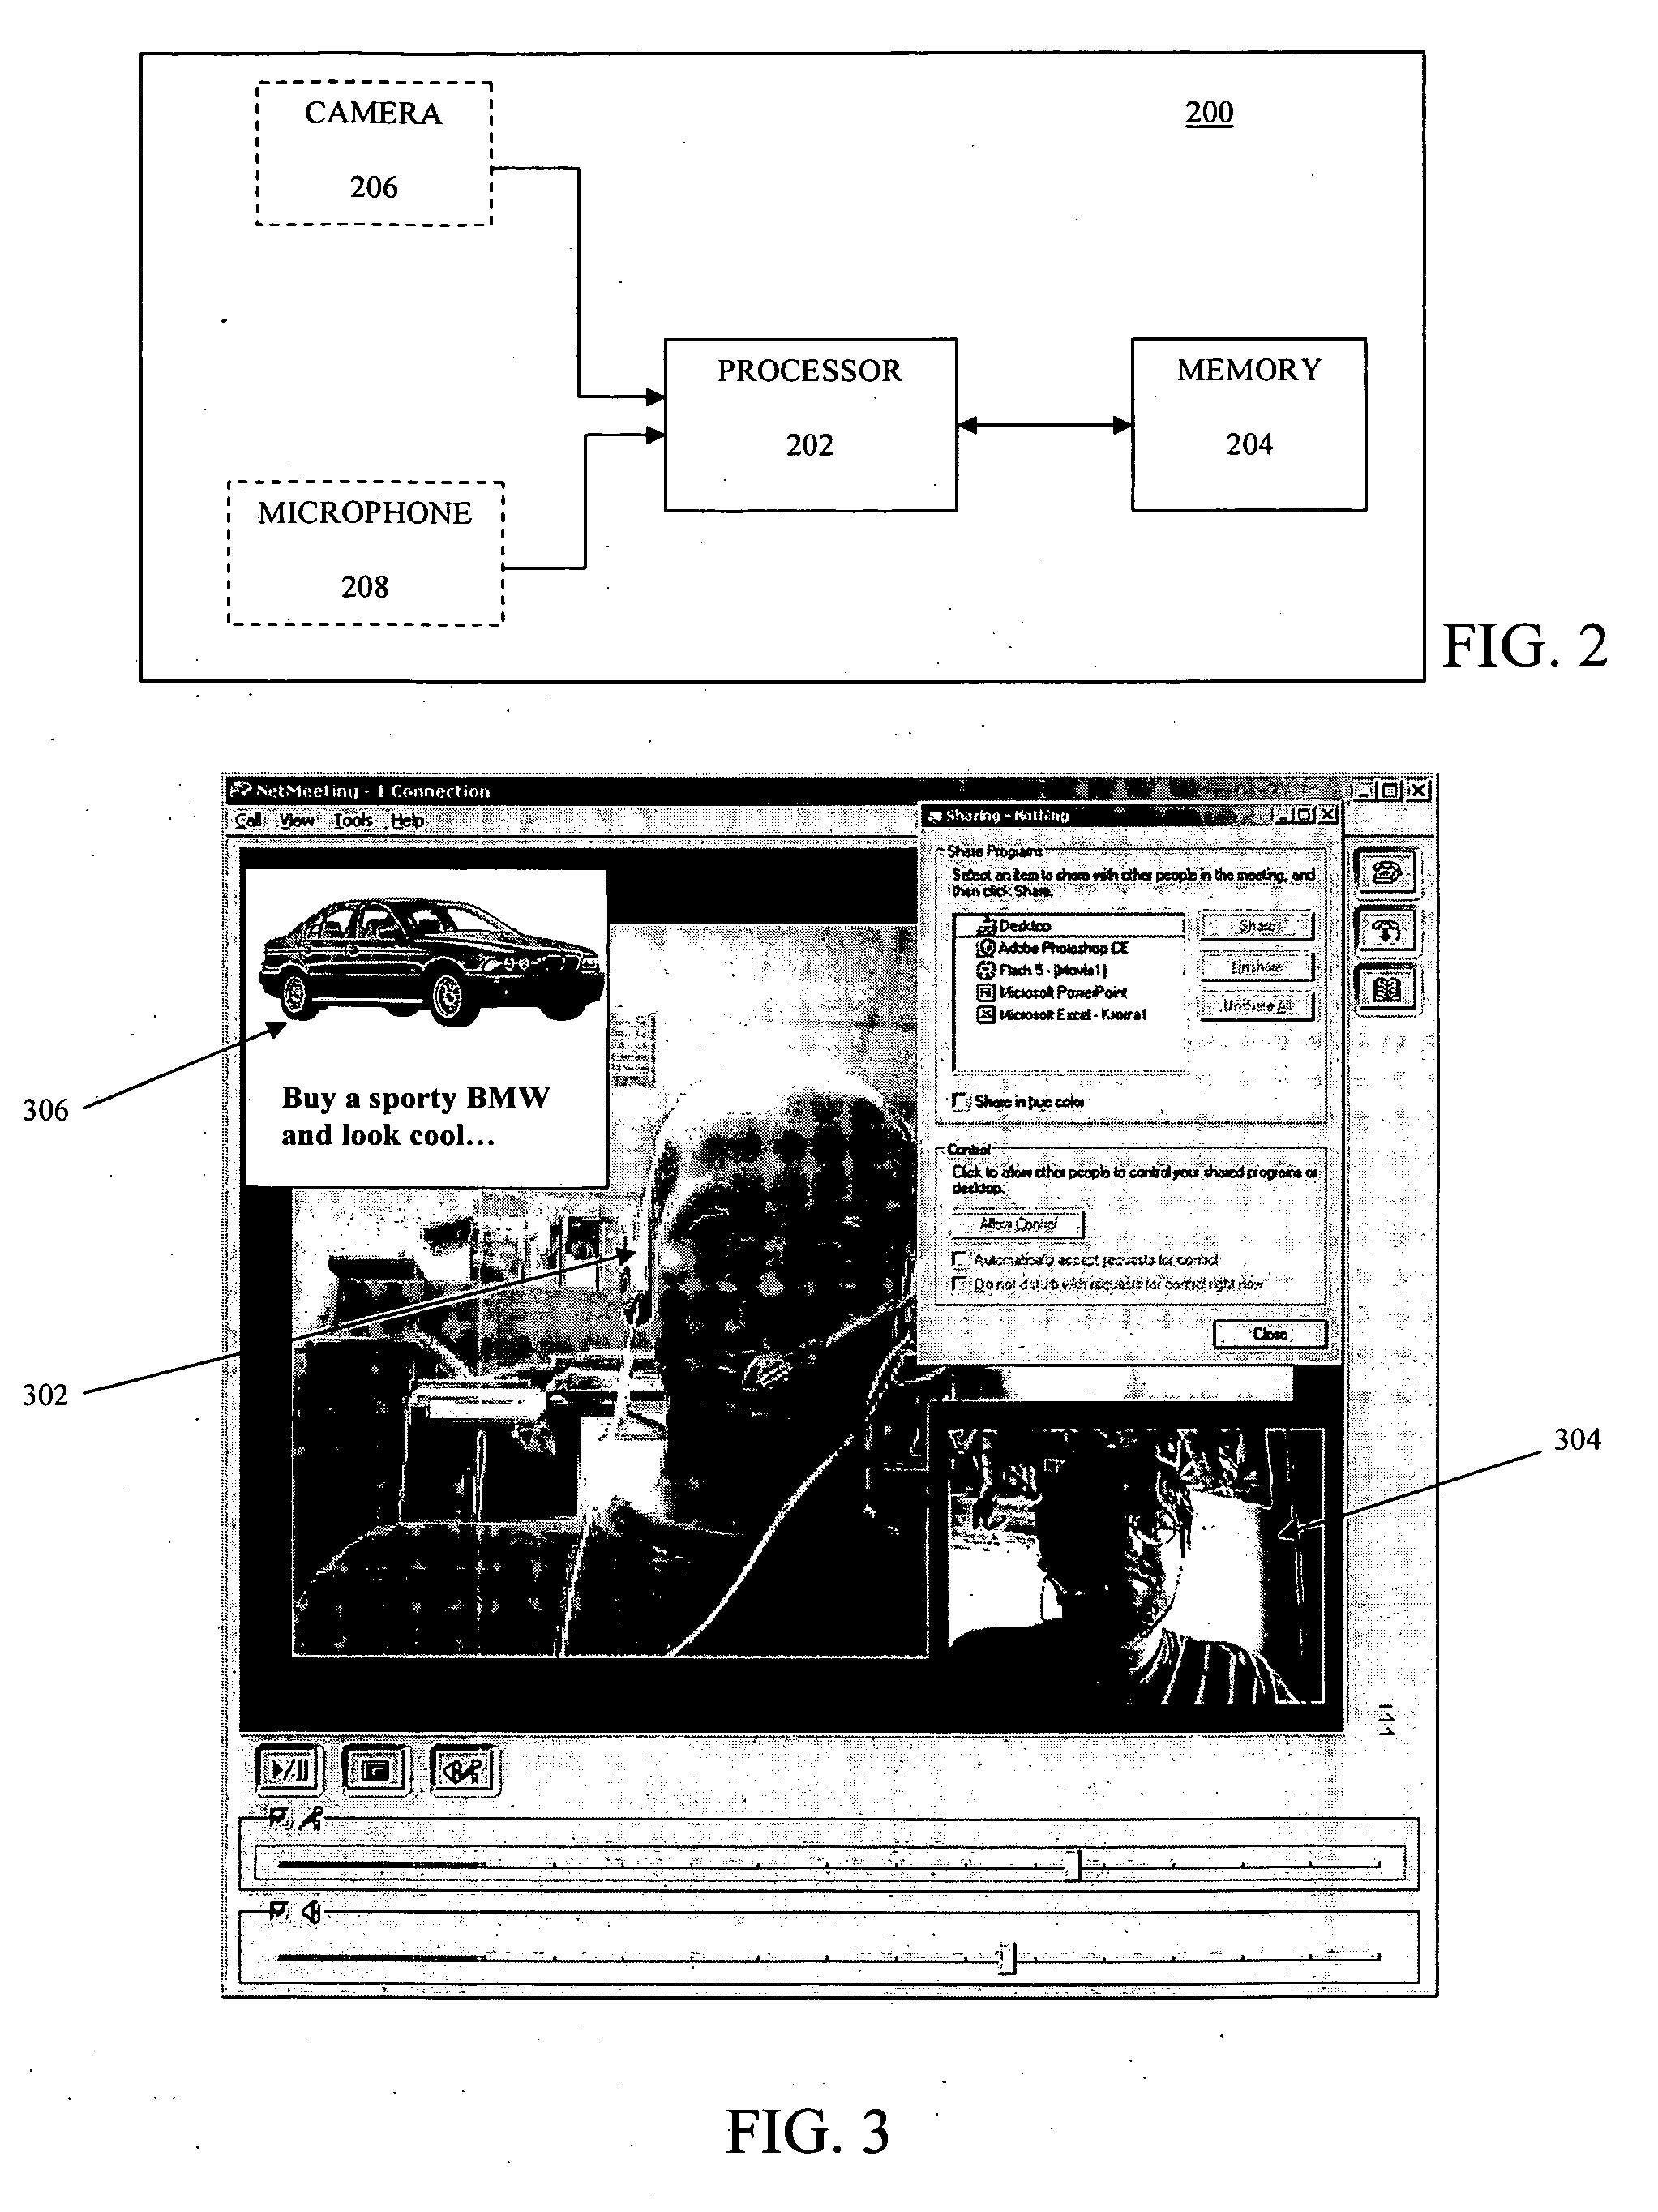 Method and apparatus for using age and/or gender recognition techniques to customize a user interface